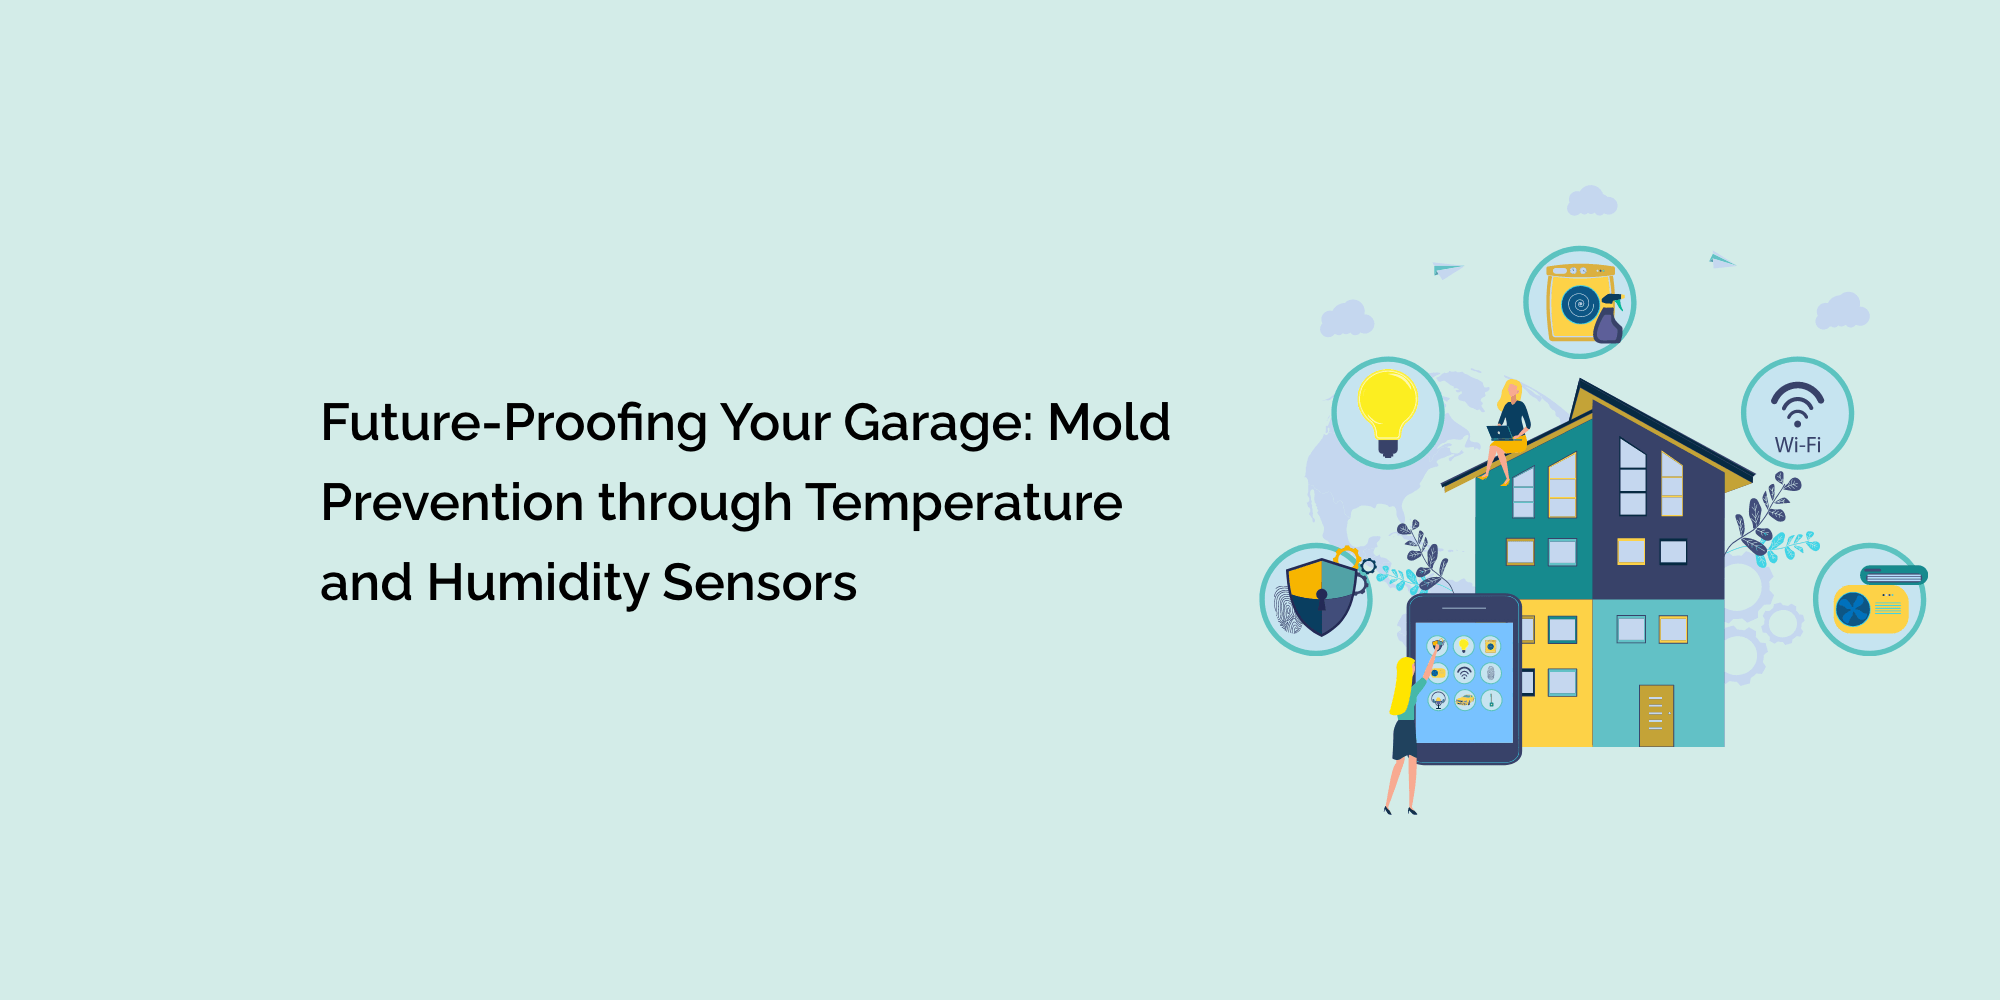 Future-Proofing Your Garage: Mold Prevention through Temperature and Humidity Sensors